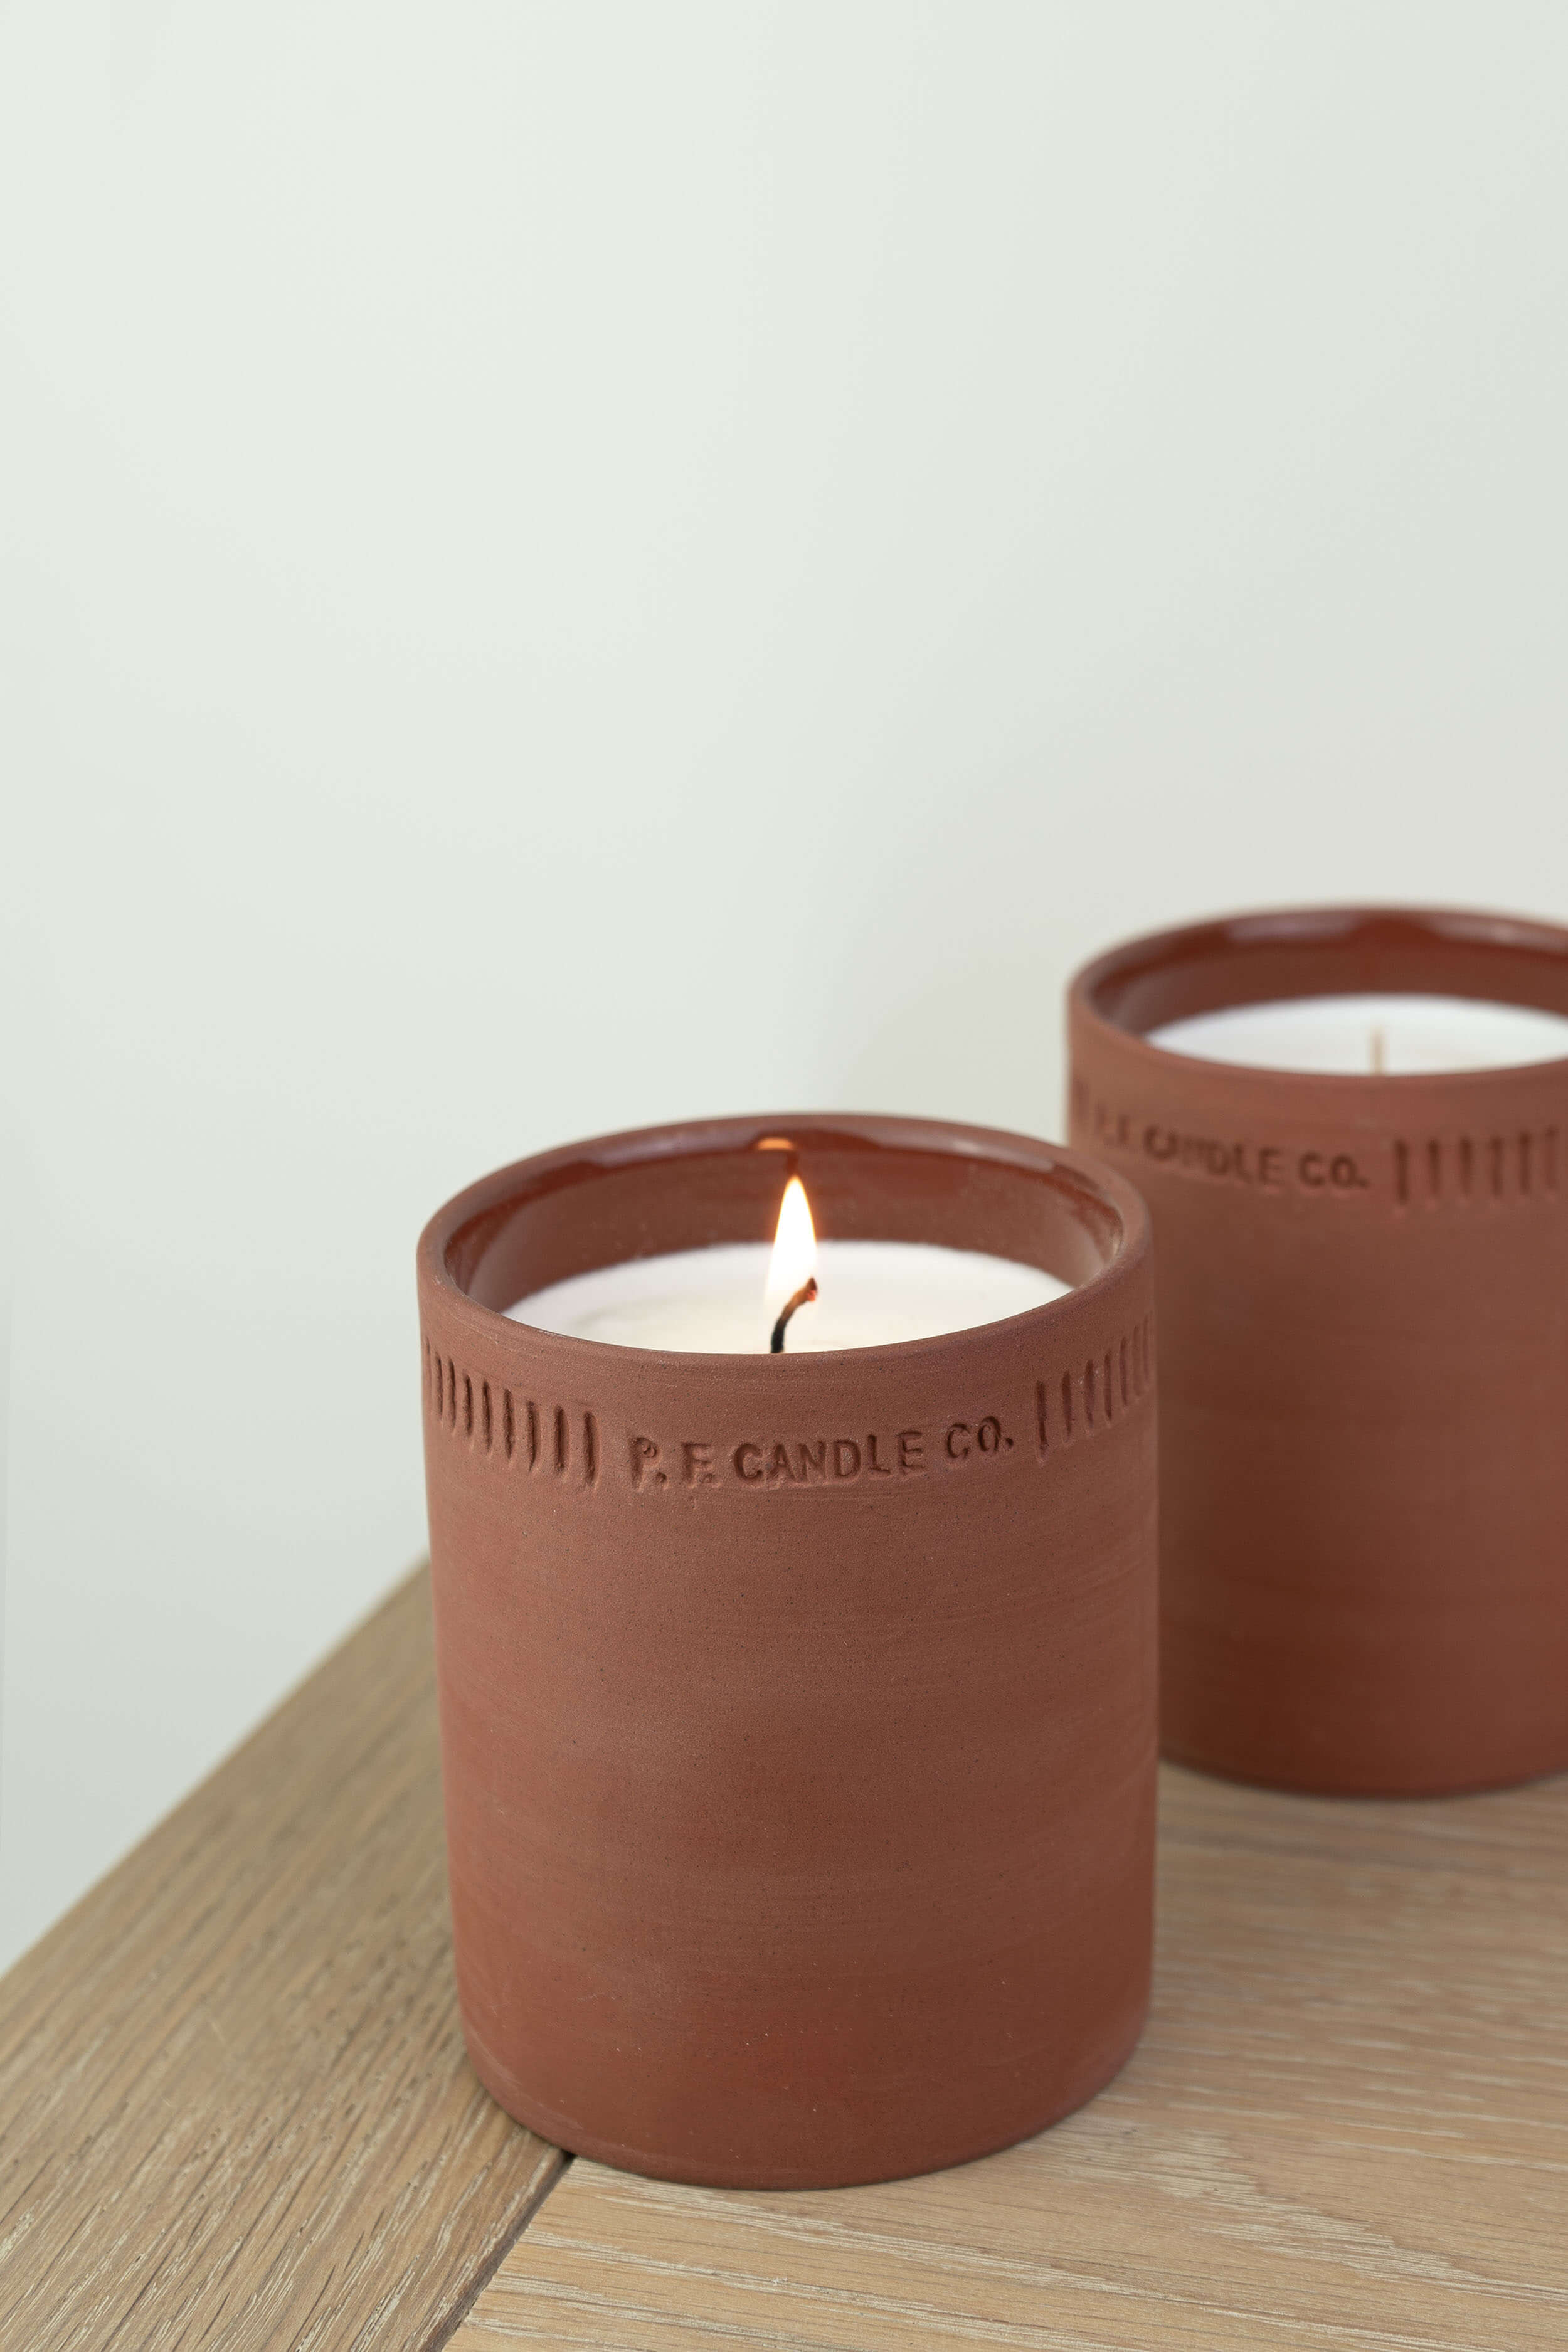 P.F. Candle Co Lavender Terra Soy Candle - Coates & Warner